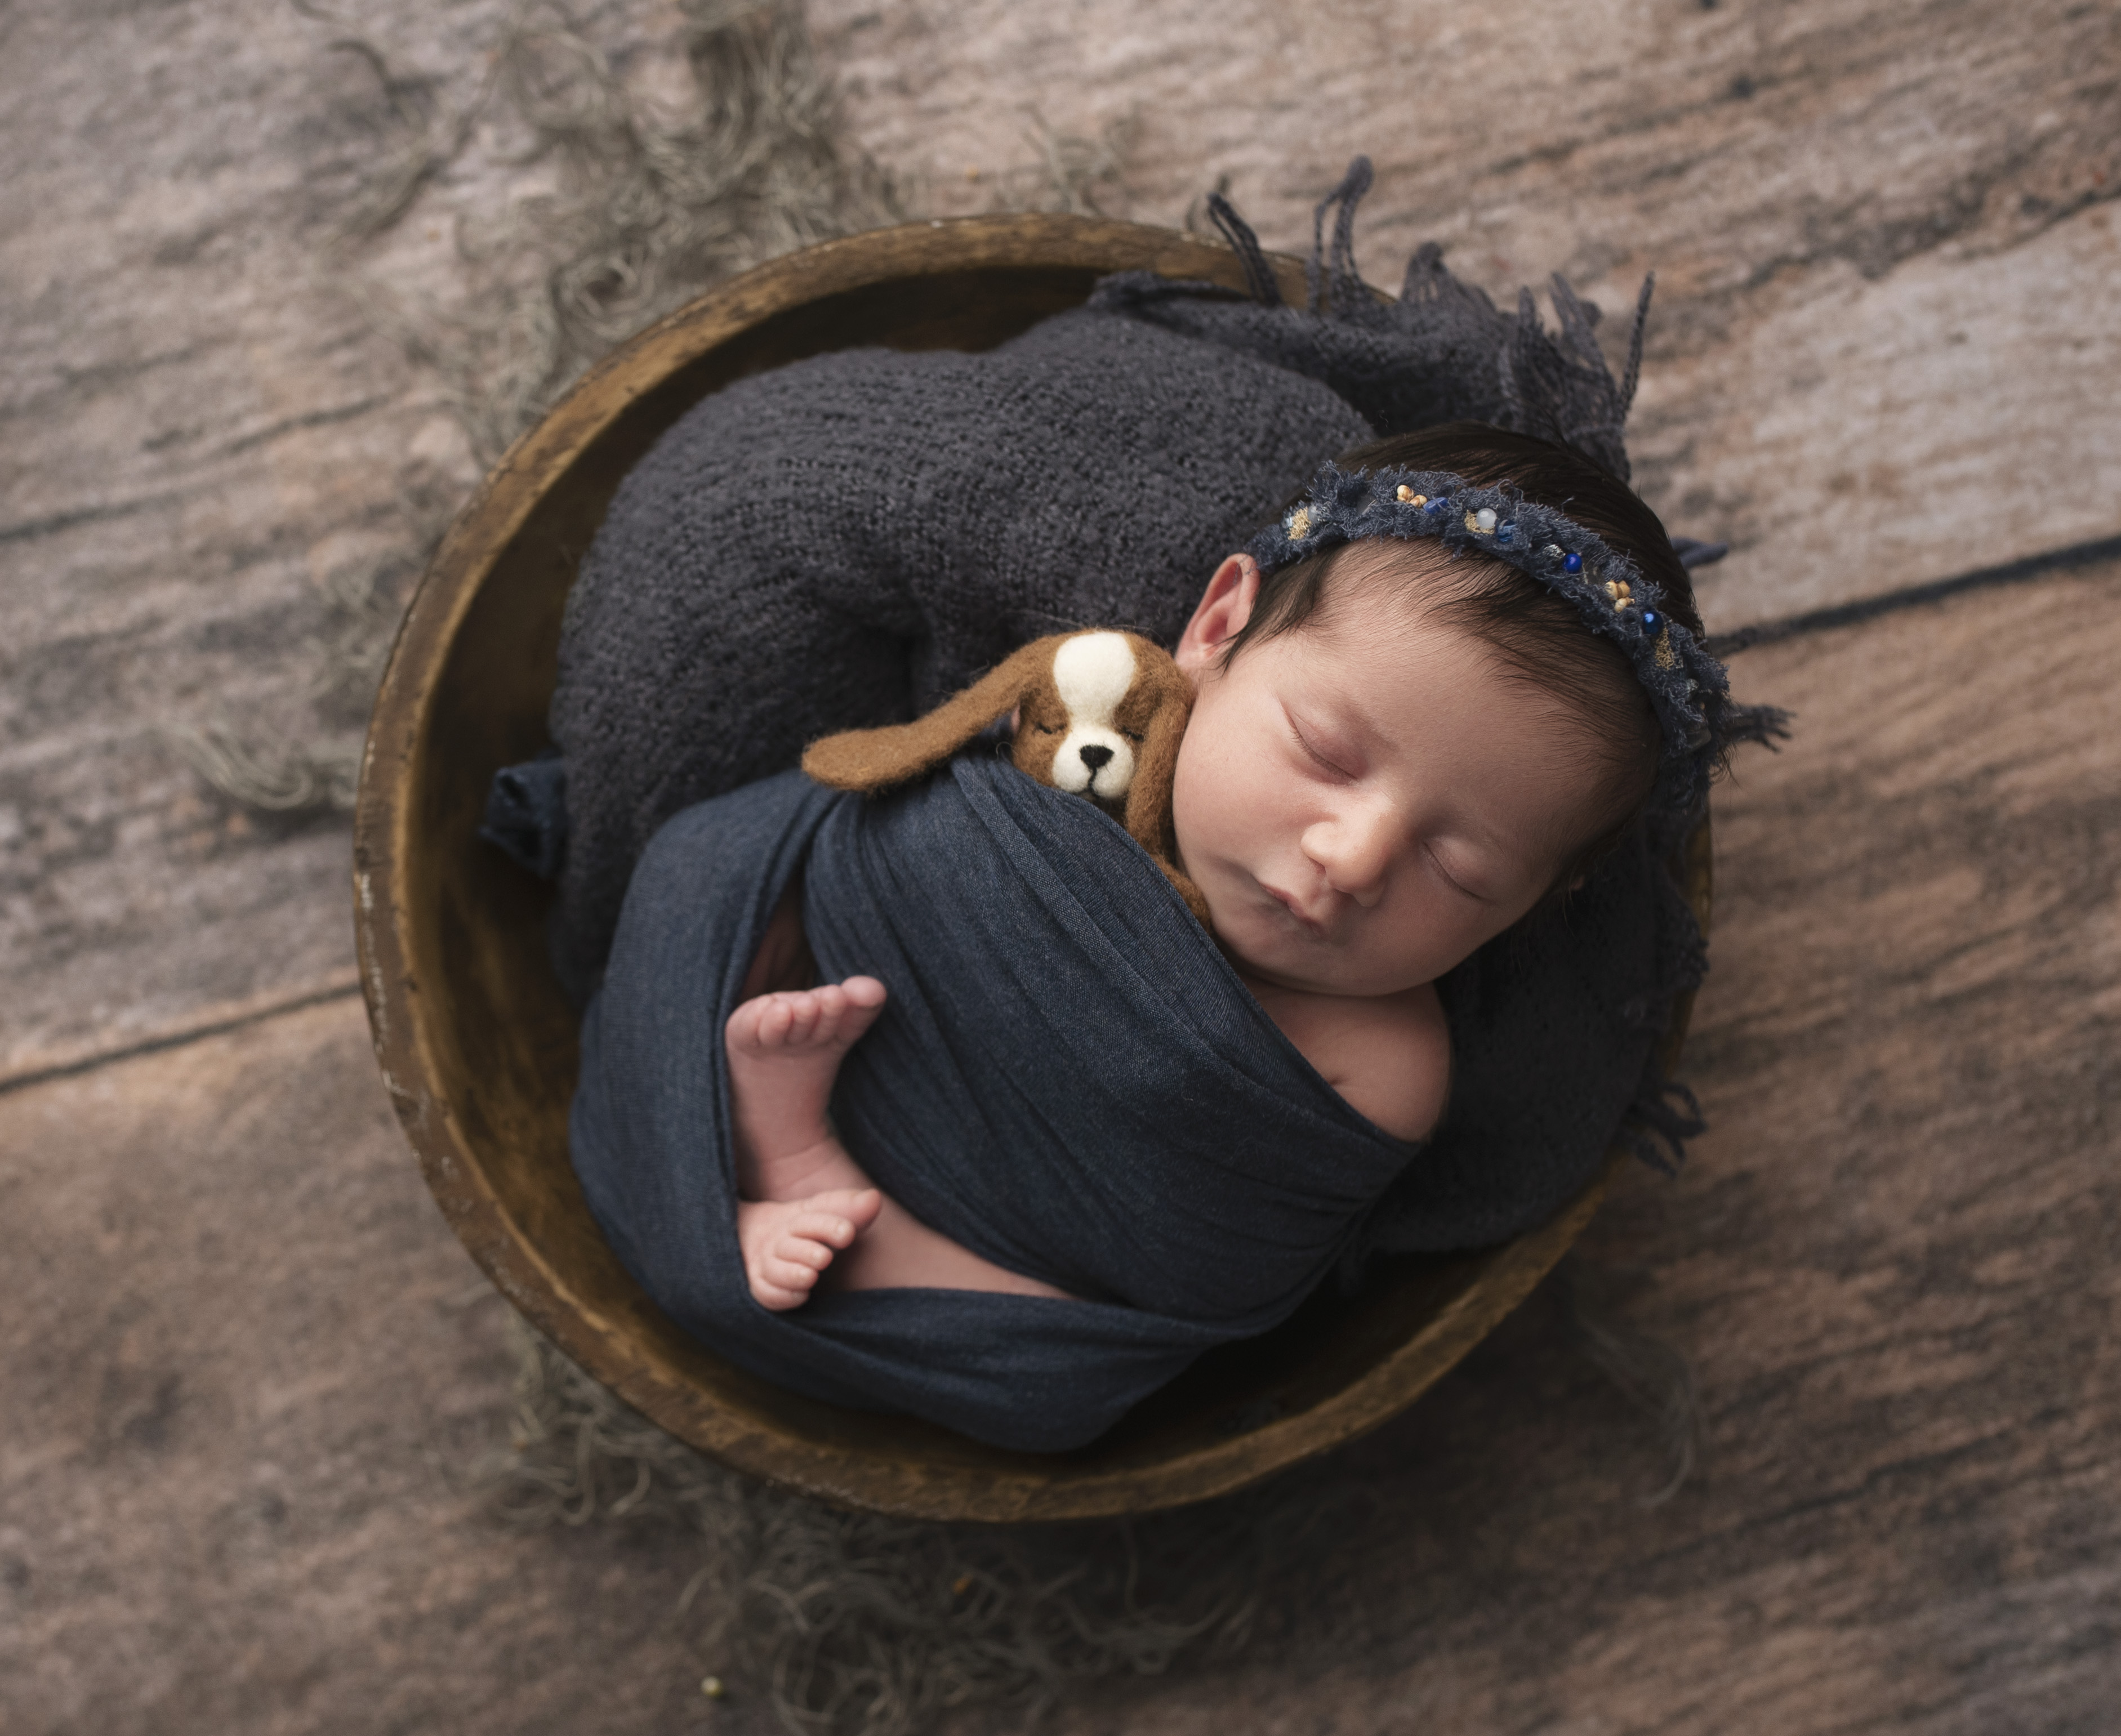 Newborn grand rapids photographer baby swaddled in a bowl